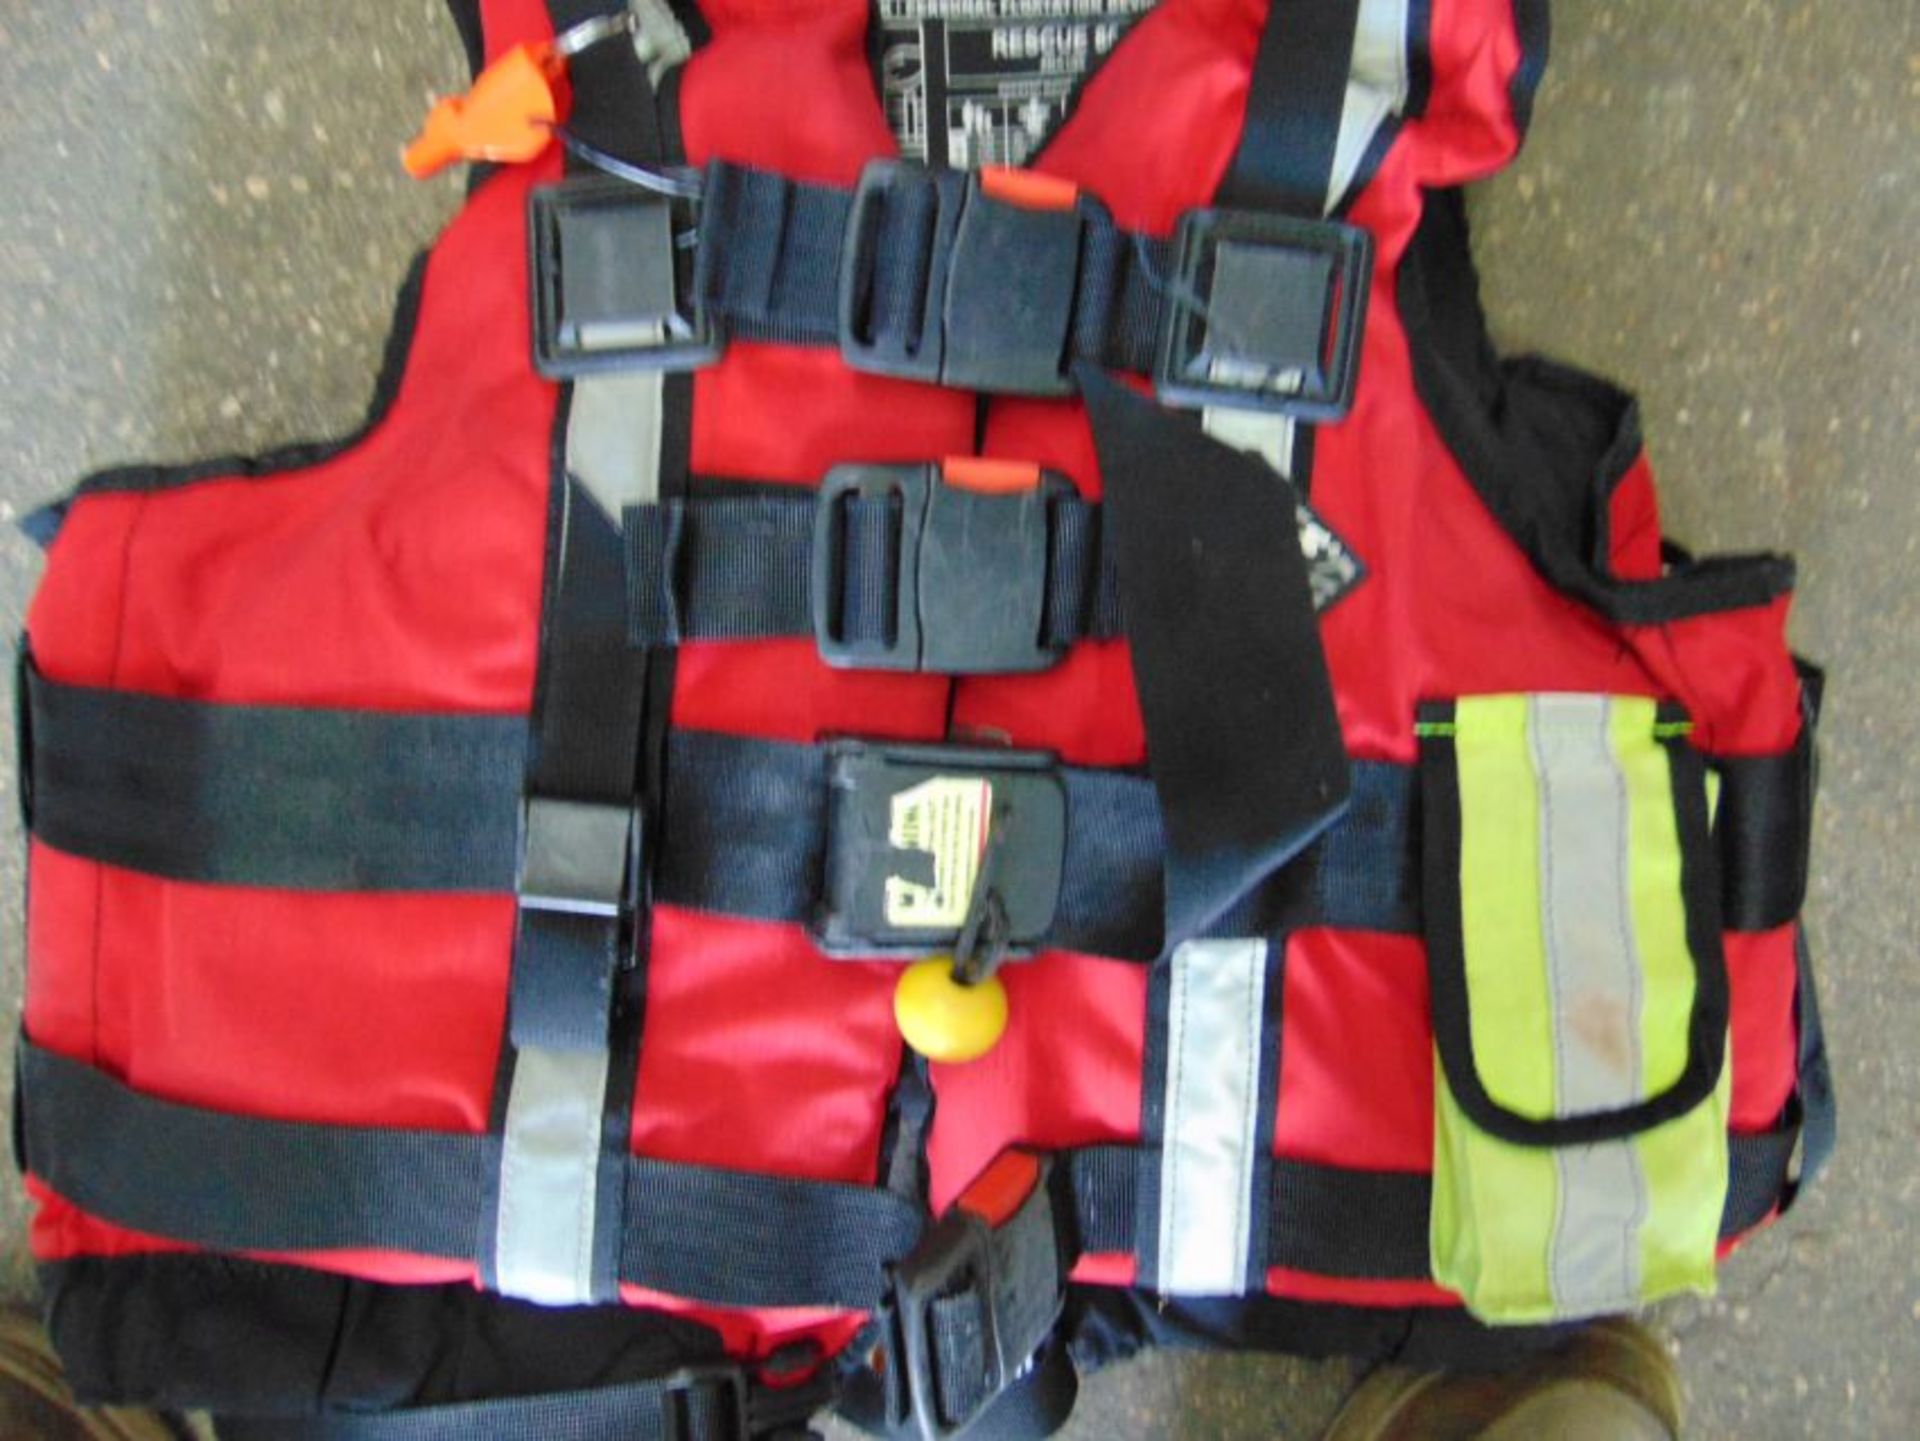 Palm Professional Rescue 800 Buoyancy Aid - PFD Personal Floatation Device Size L/XL - Image 2 of 4